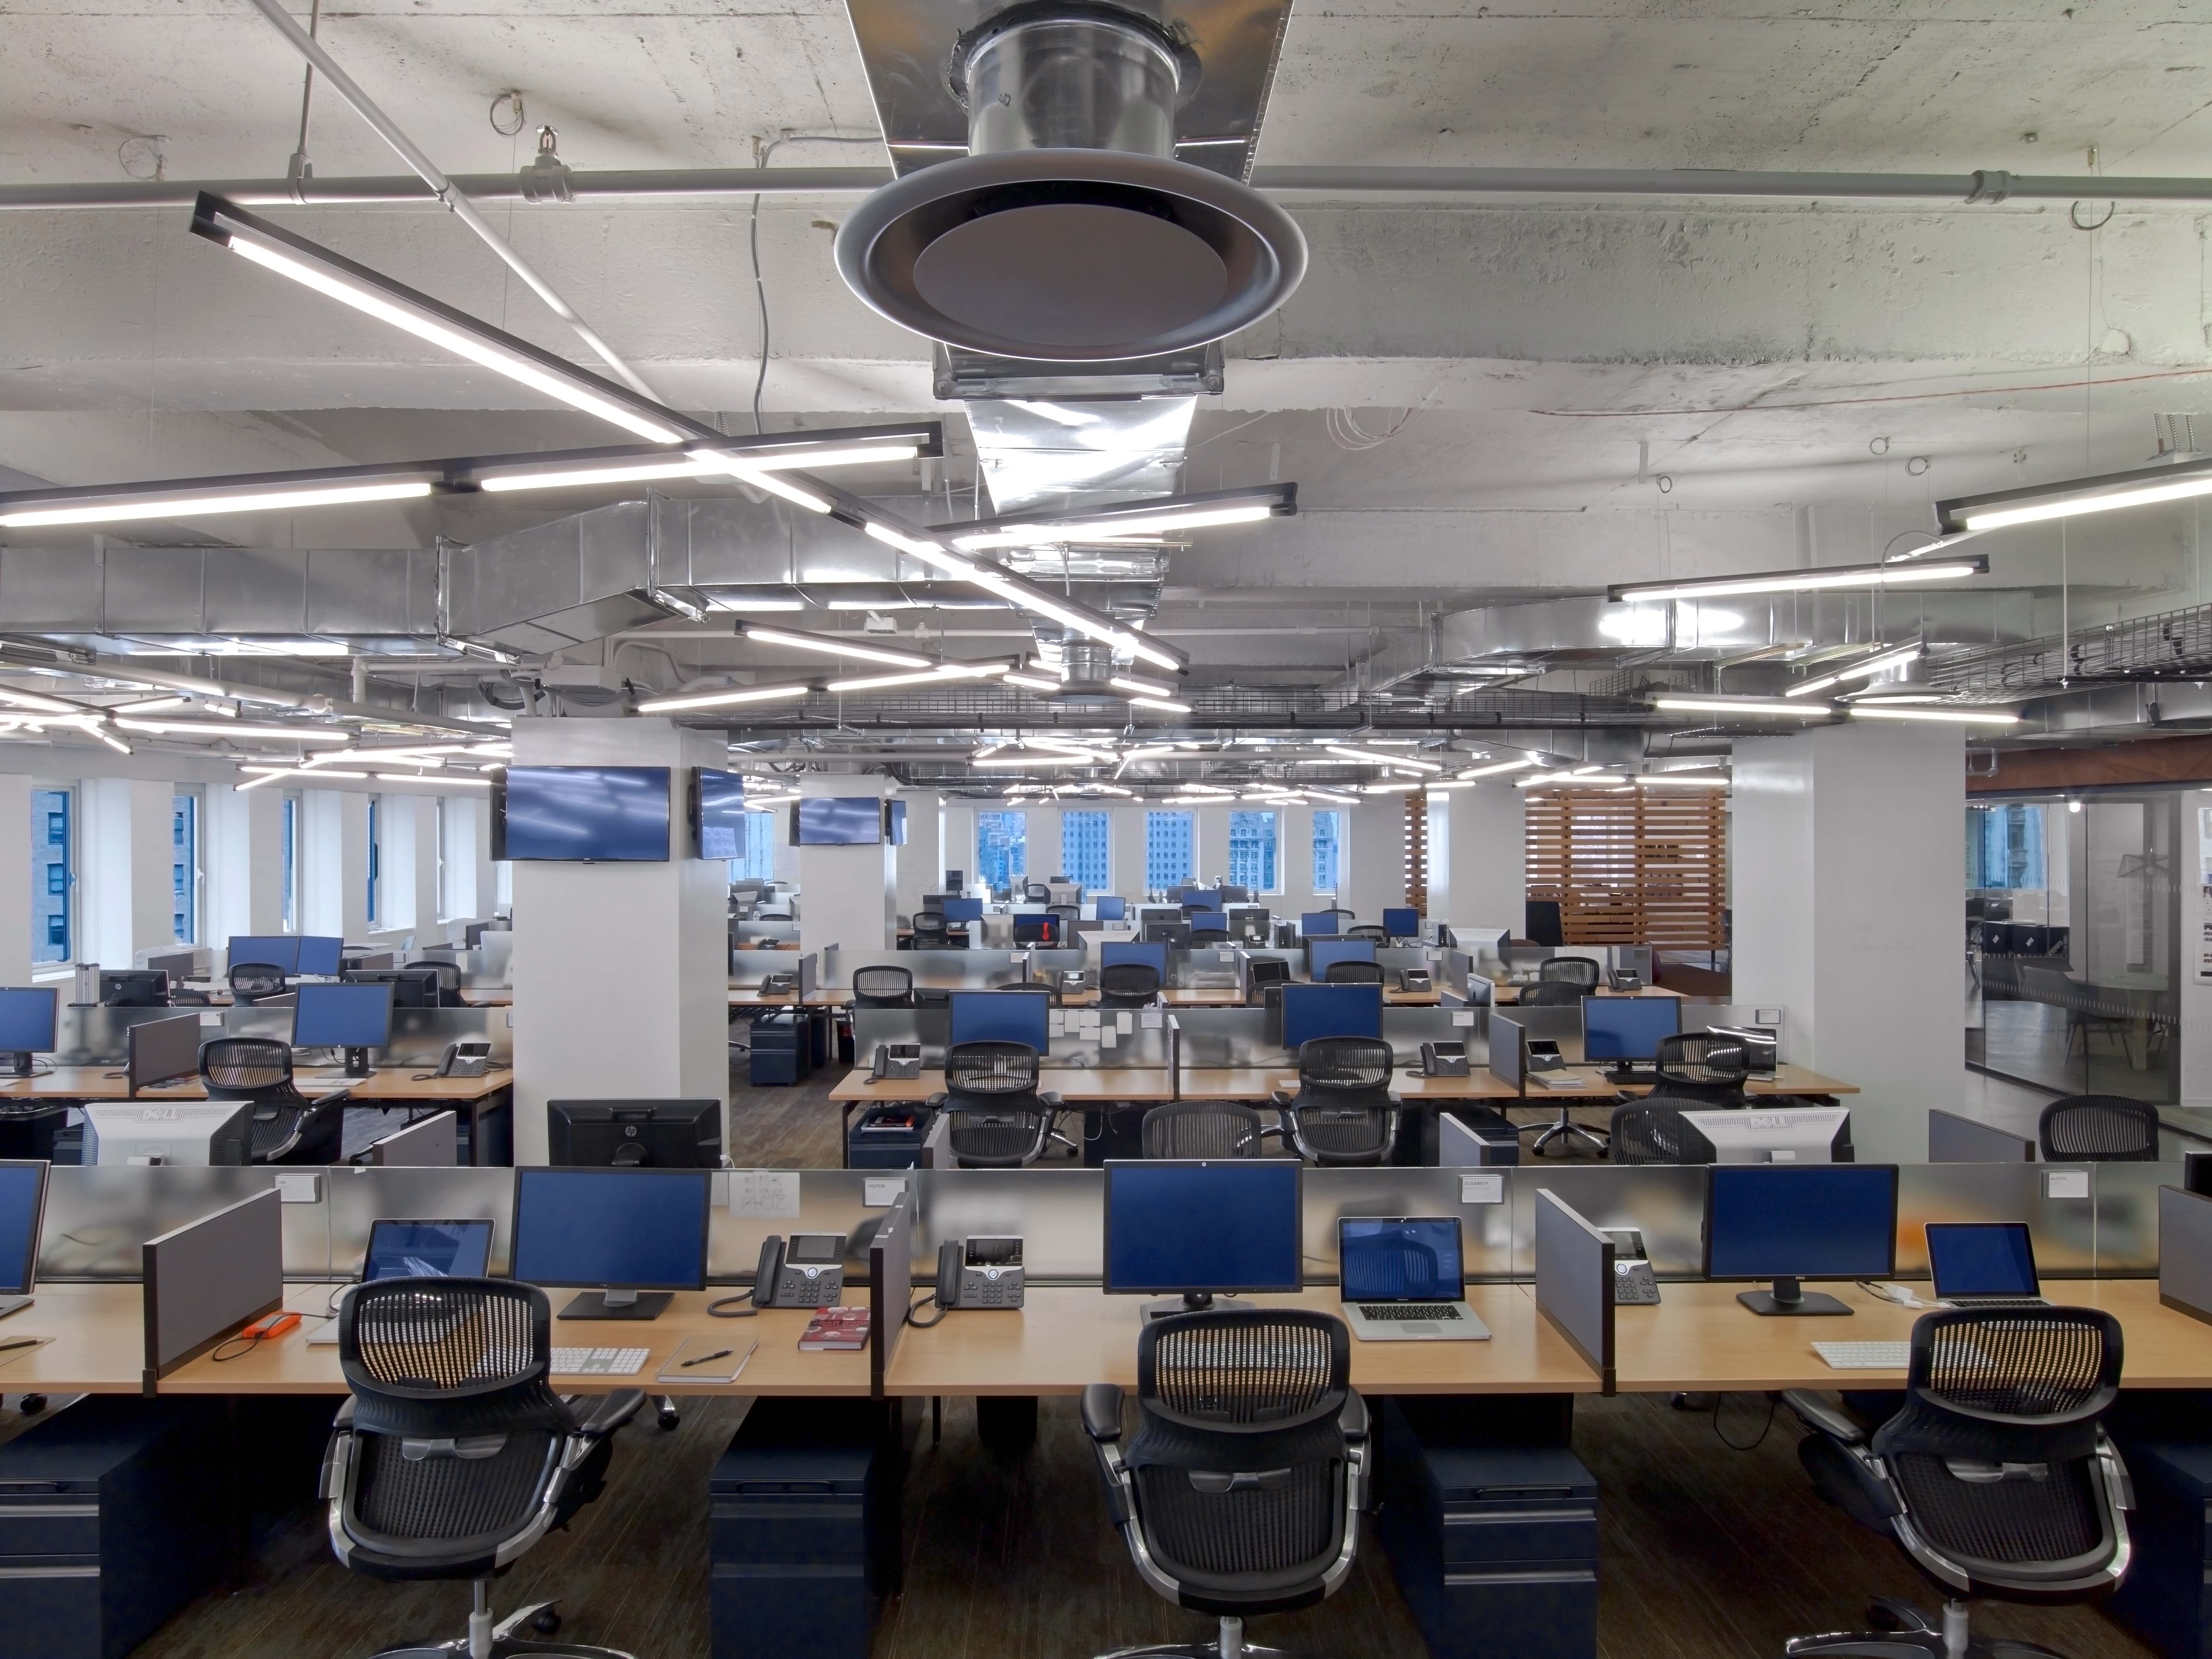 Dense, open workspace, an exposed ceiling o satisfy the desired industrial aesthetic, and non-traditional workplace lighting. Photo by Eric Laignel Photography.